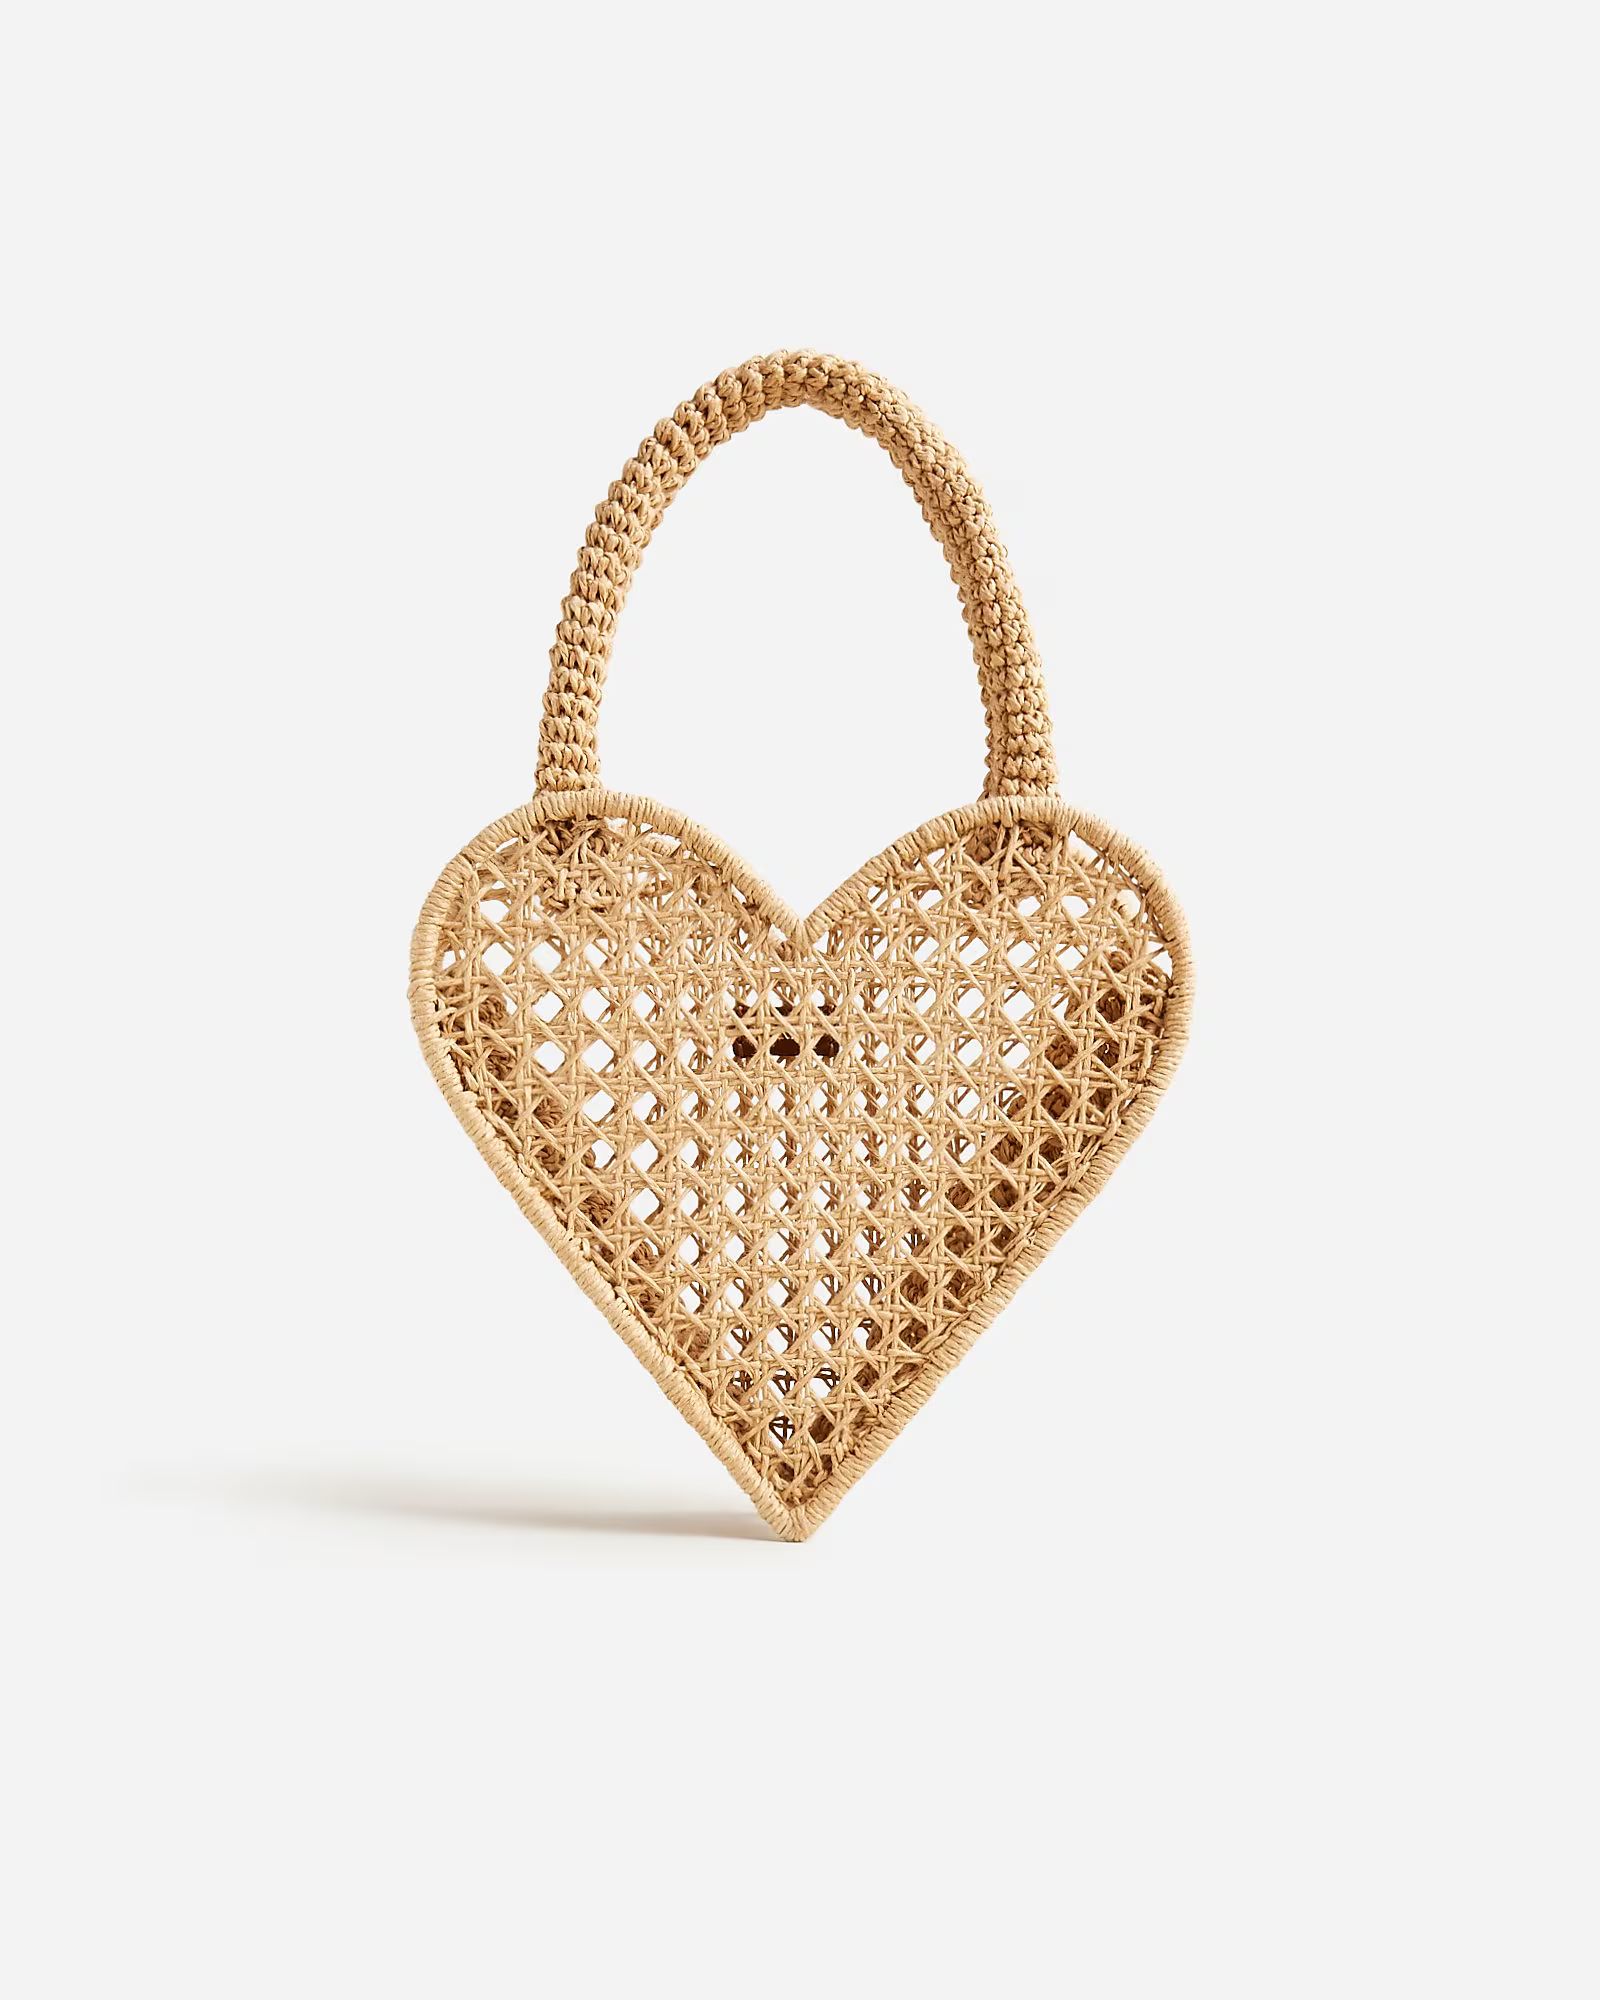 newSmall heart straw bag$98.00NaturalOne SizeSize & Fit Information  Add to Bag4 payments of $24.... | J.Crew US